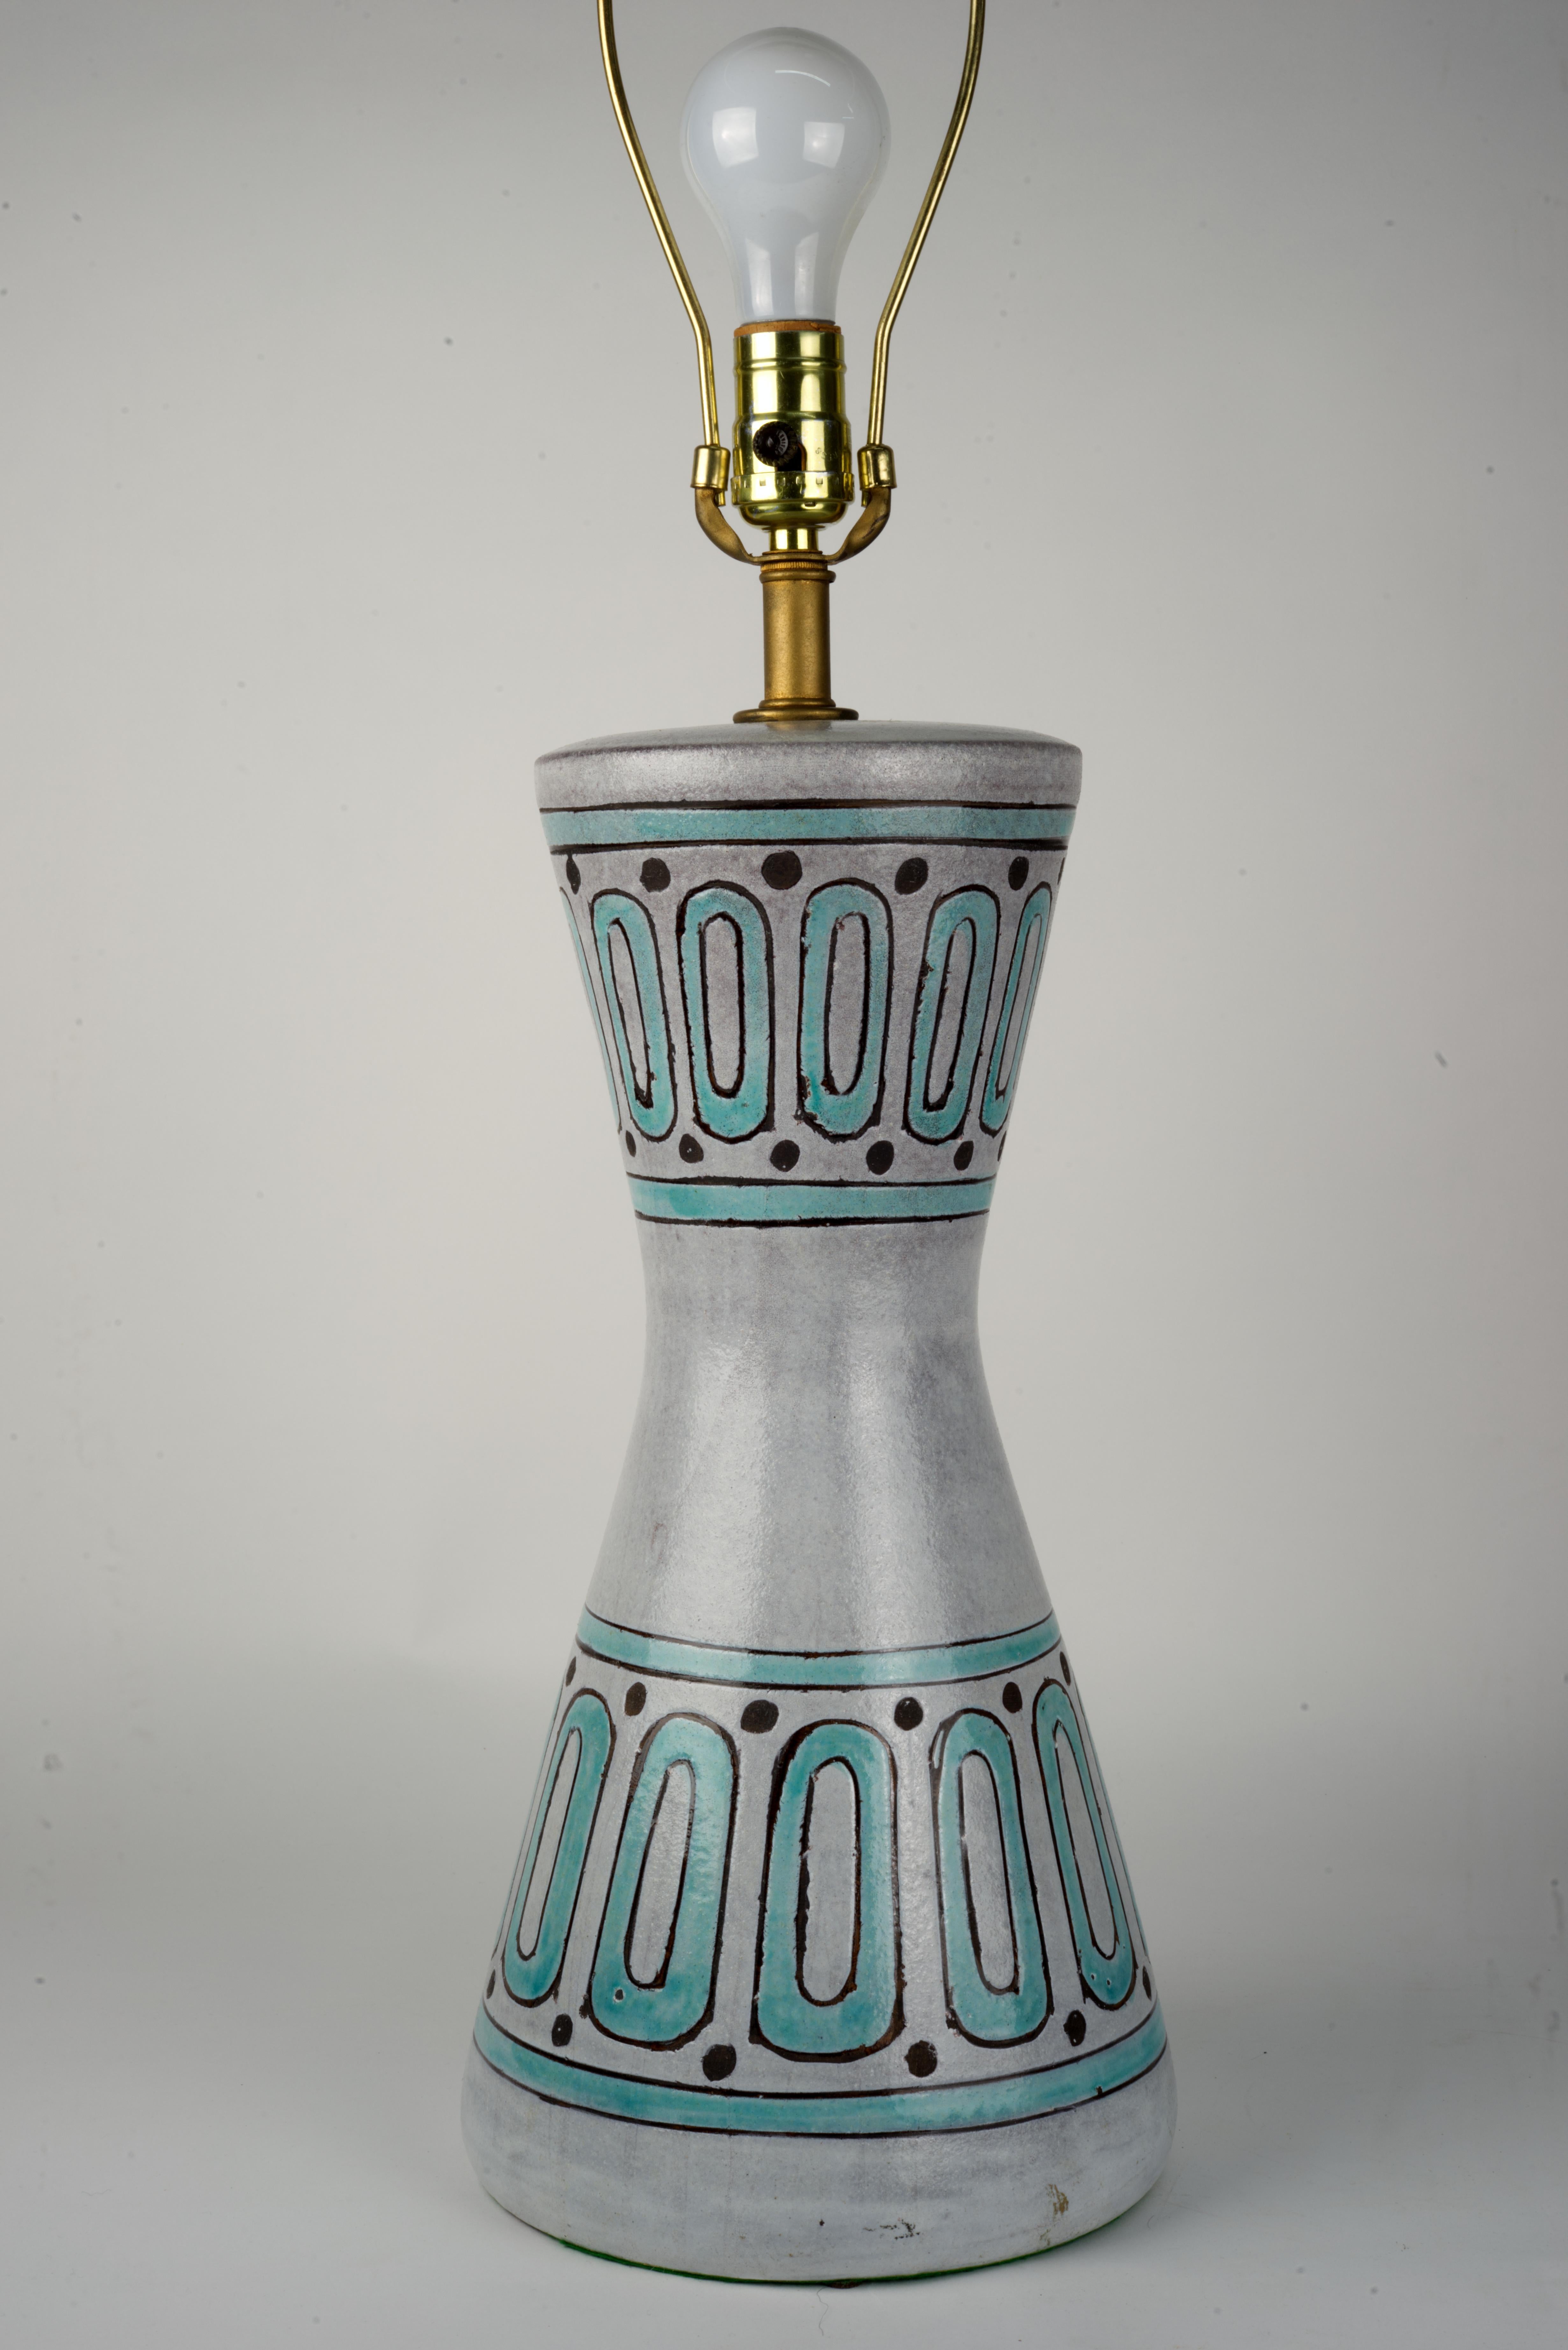 Rare and unusual Italian mid-century modern textured ceramic table lamp was designed by Aldo Londi for Bitossi Ceramiche. Hourglass-shaped lamp is decorated with two bands of incised abstract geometric decorations in teal and dark brown on pale